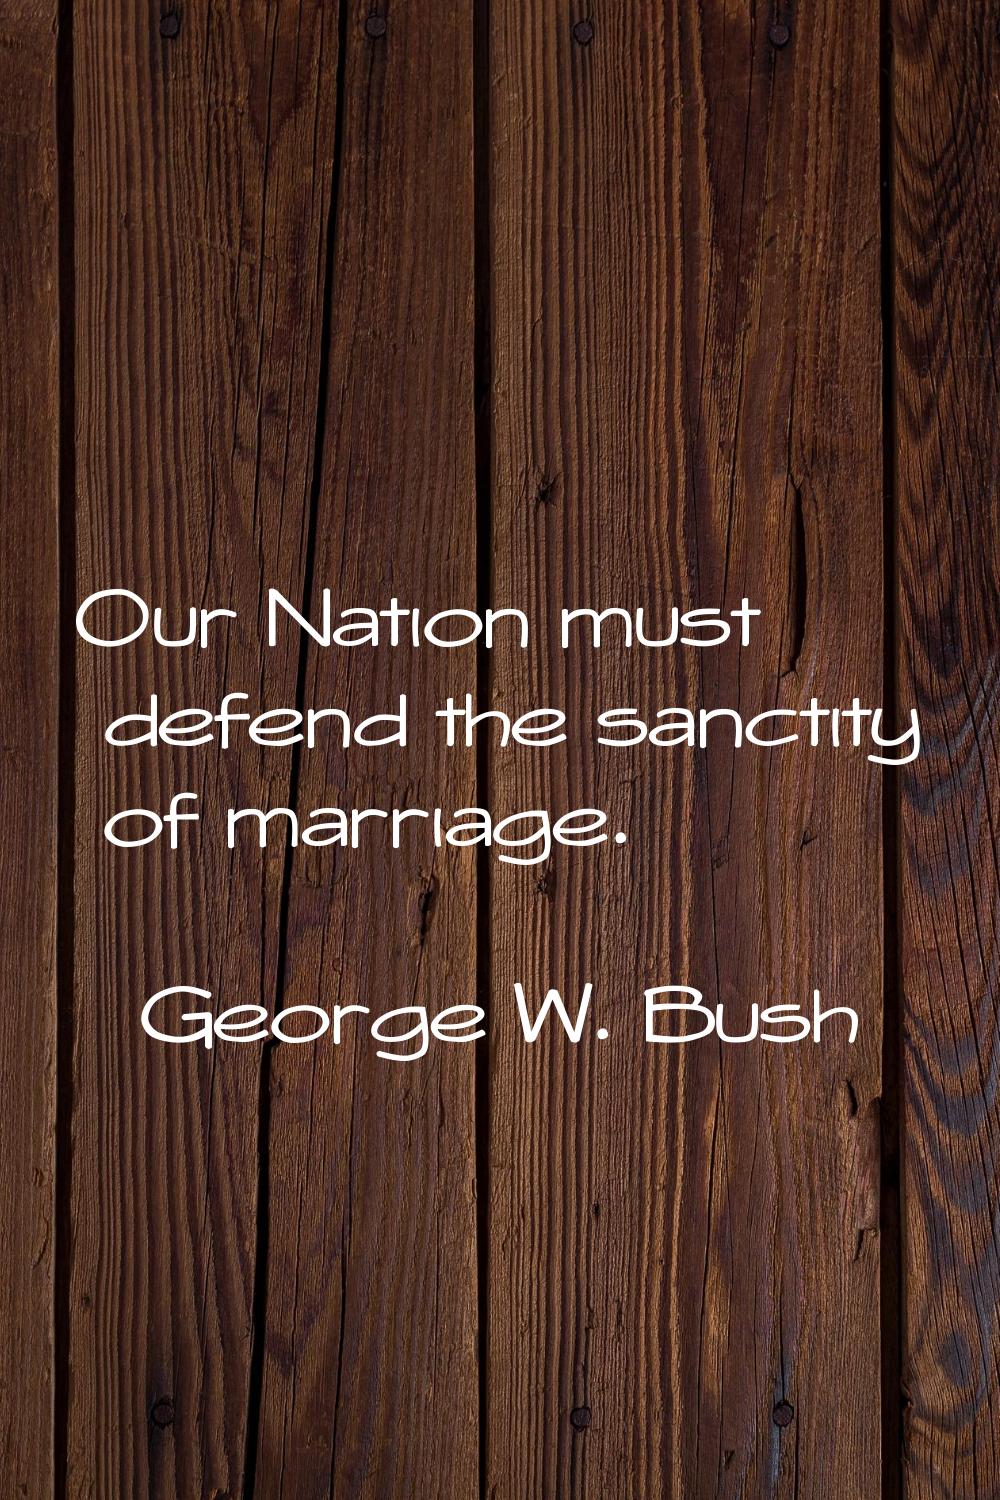 Our Nation must defend the sanctity of marriage.